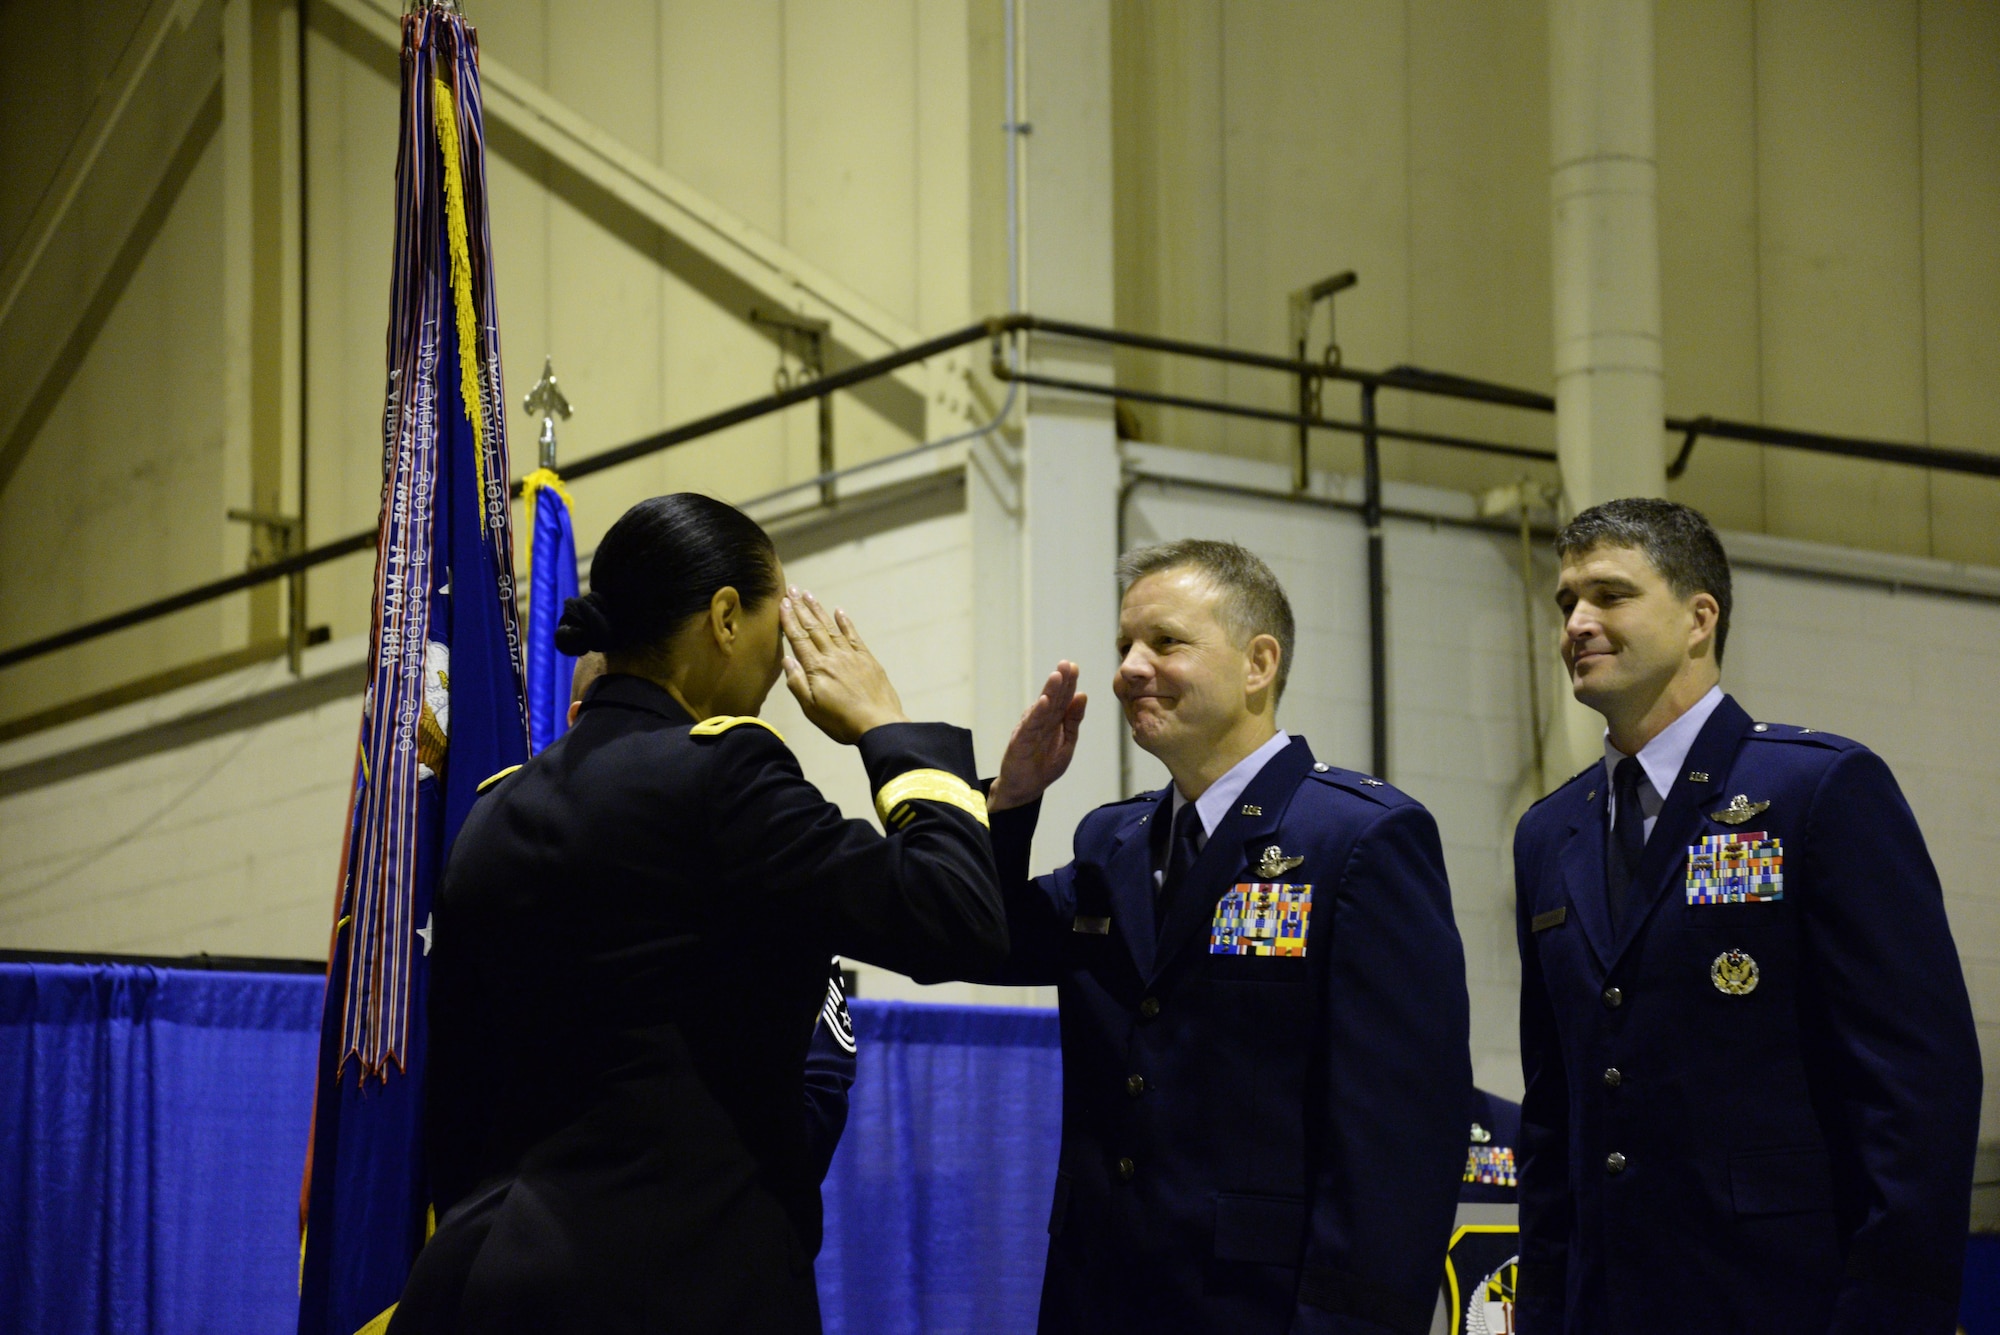 U.S. Air Force Brig. Gen. Scott Kelly, Assistant Adjutant General - Air, salutes U.S. Army Maj. Gen. Linda Singh, Maryland National Guard Adjutant General, at Warfield Air National Guard Base, Baltimore, Md., during a change of command ceremony December 6, 2015. During the ceremony Brig. Gen. Randolph Staudenraus assumed command of the 175th Wing from Kelly. (U.S. Air National Guard photo by Airman 1st Class Enjoli Saunders/RELEASED)